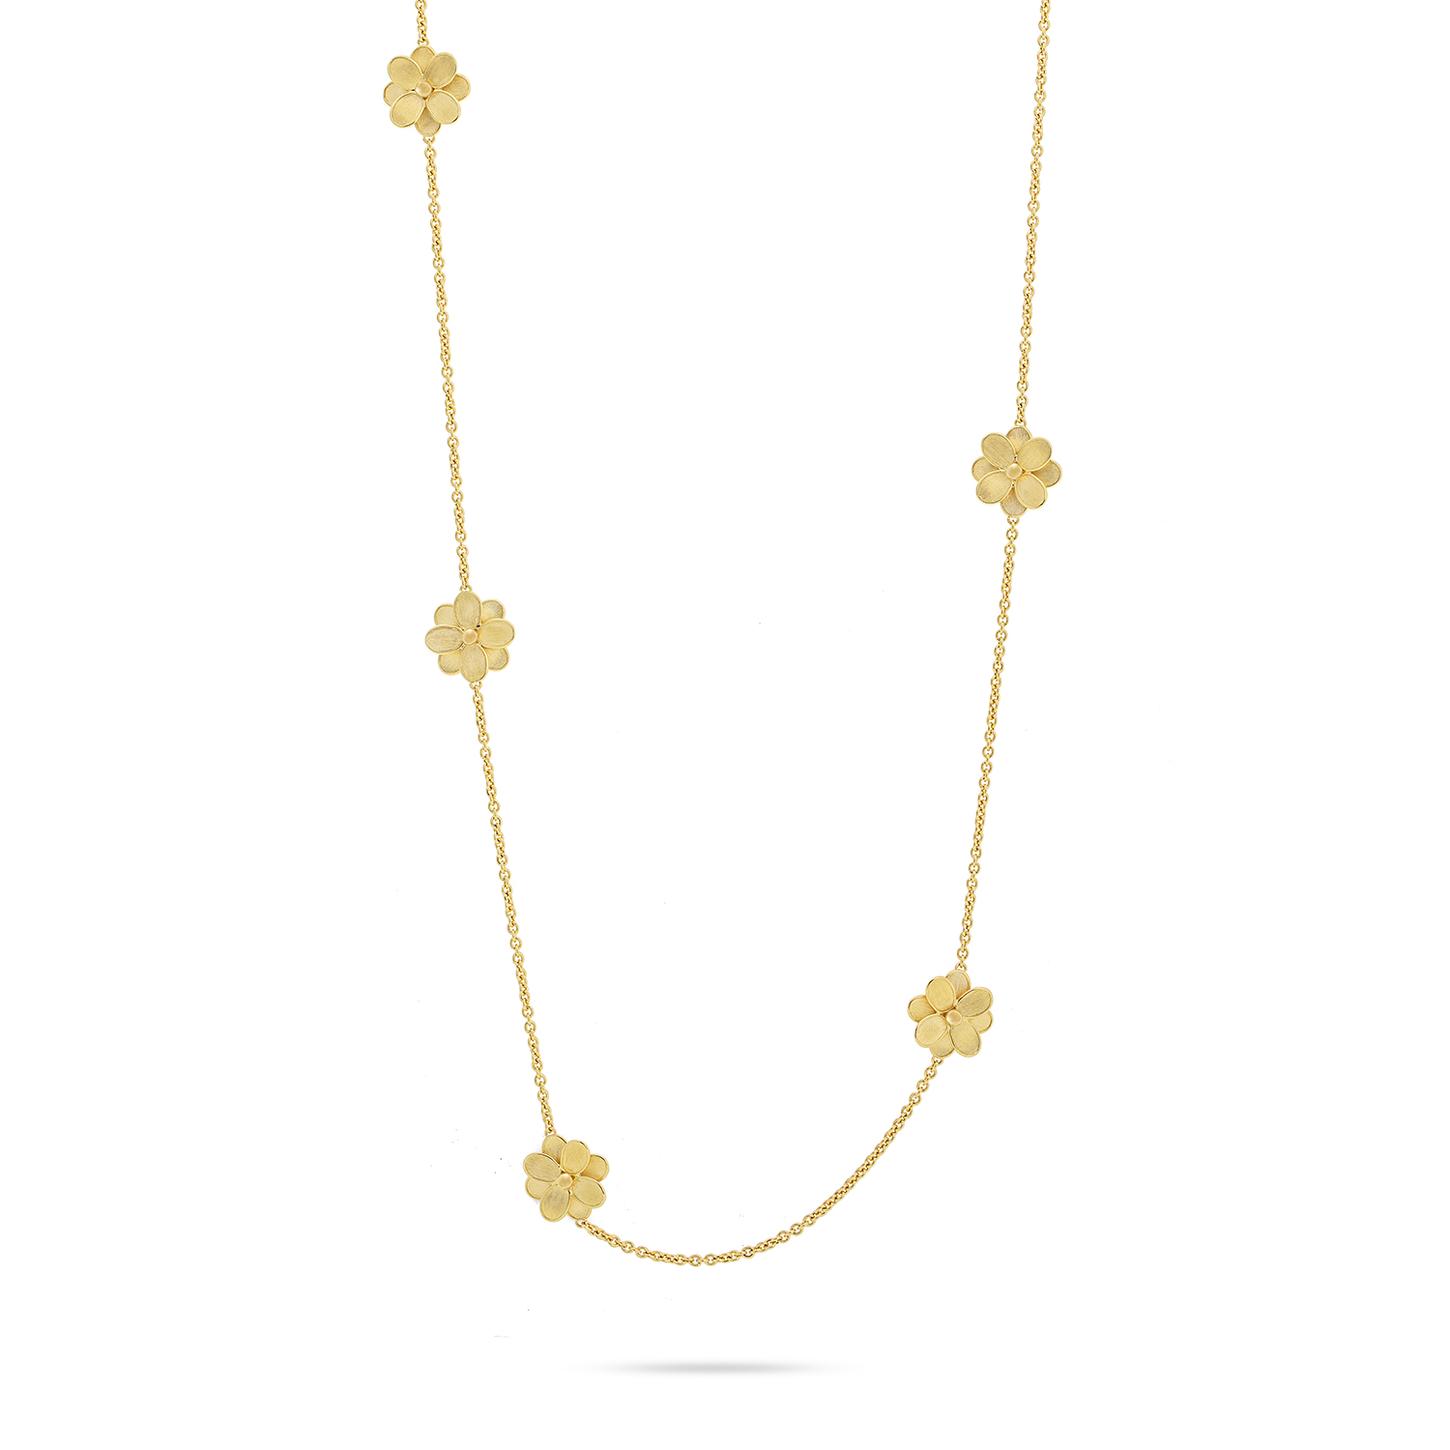 Marco Bicego Yellow Gold Lunaria Petali 36 inch Flower Station Necklace 0